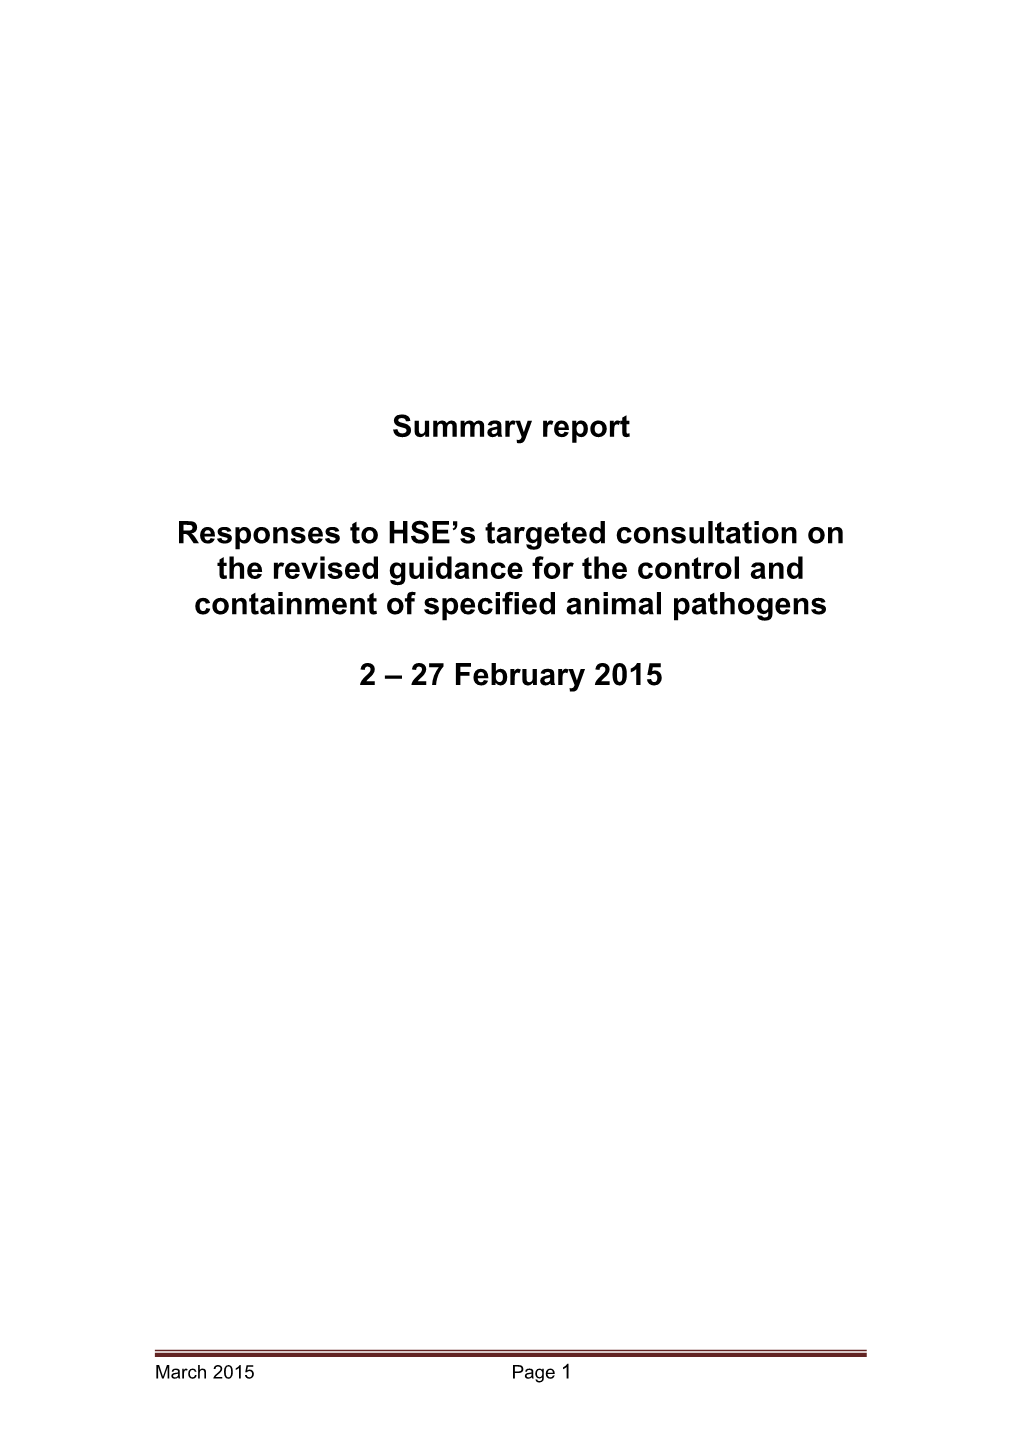 Responses to HSE S Targeted Consultation on the Revised Guidance for the Control And